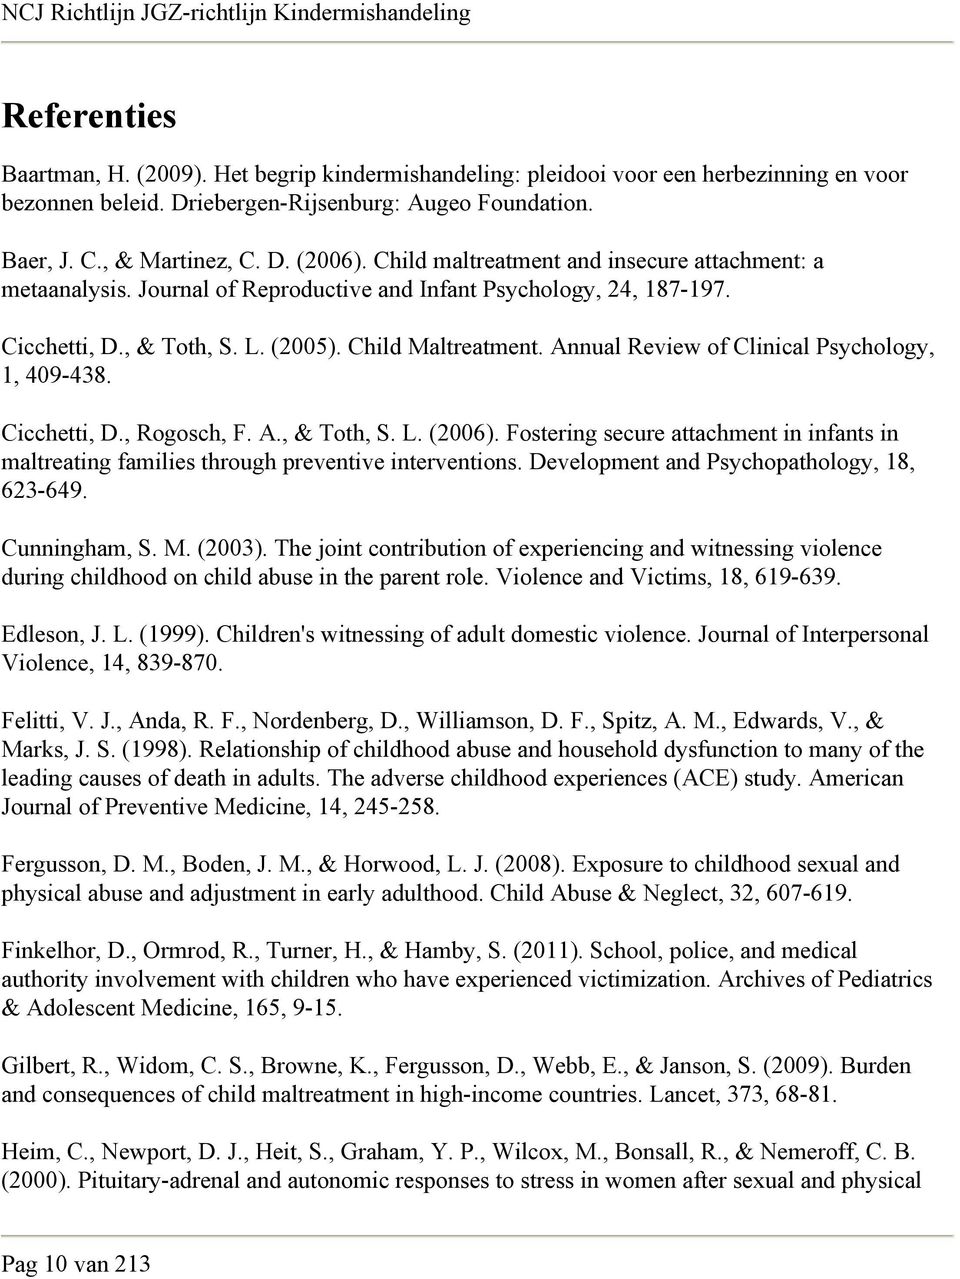 Annual Review of Clinical Psychology, 1, 409-438. Cicchetti, D., Rogosch, F. A., & Toth, S. L. (2006). Fostering secure attachment in infants in maltreating families through preventive interventions.